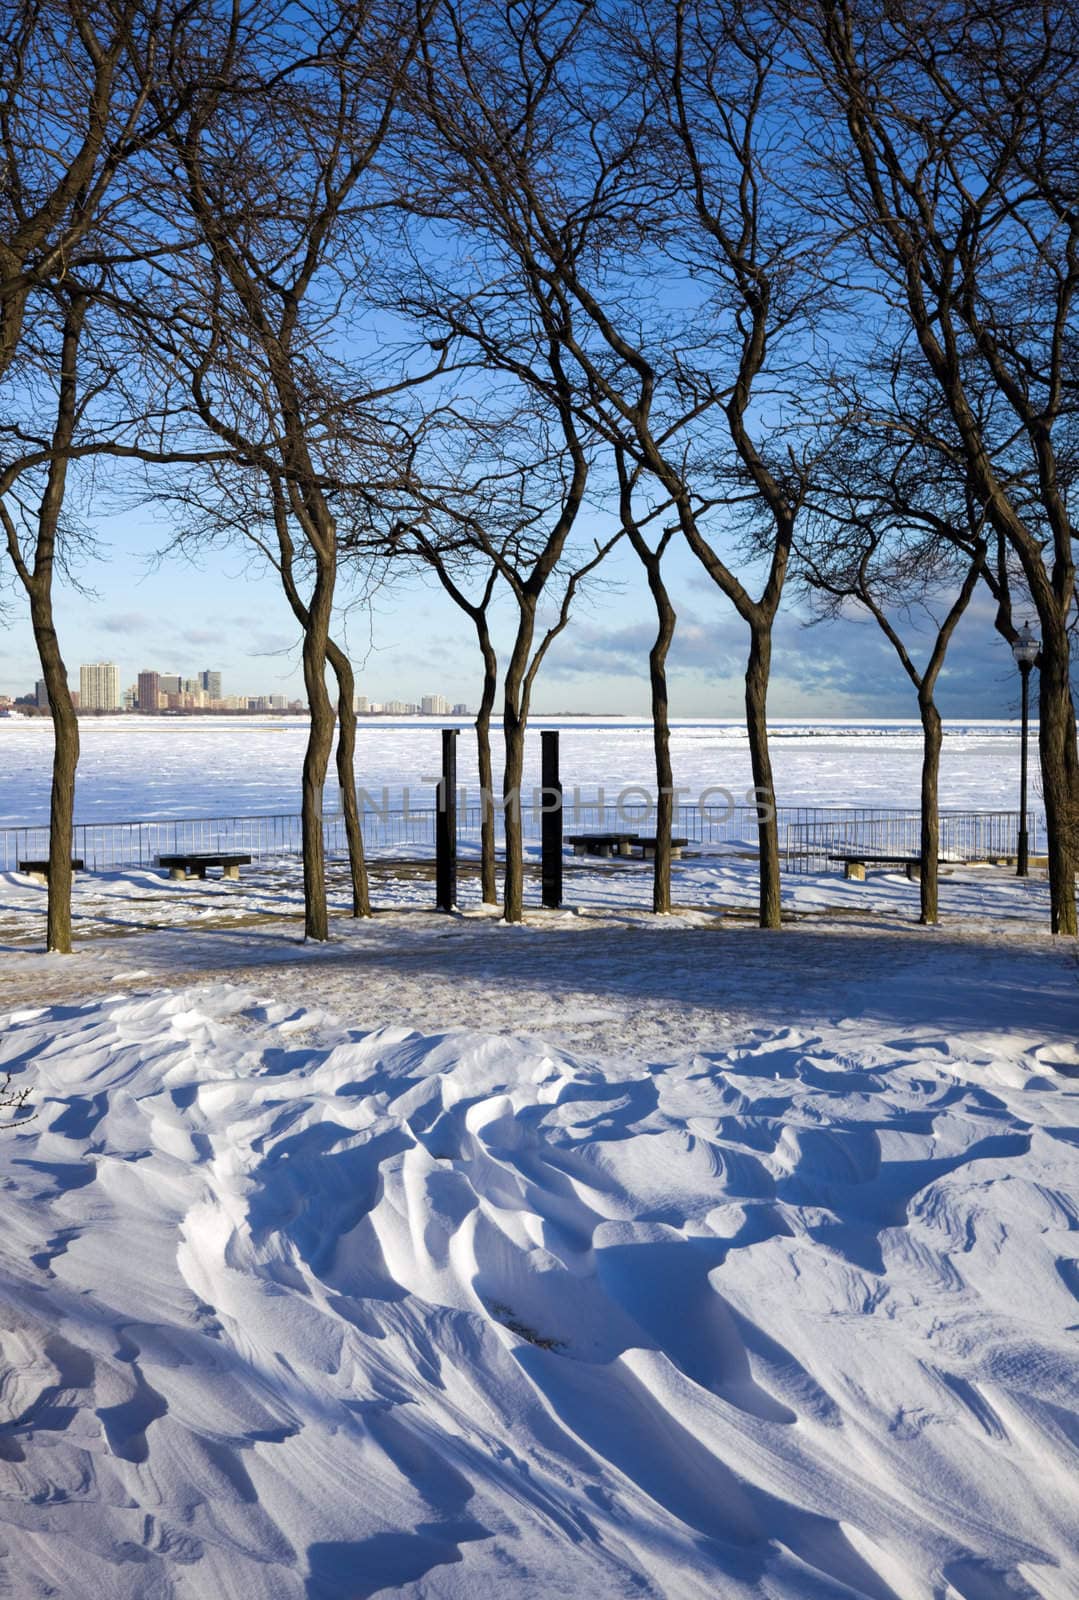 Winter in Chicago by benkrut